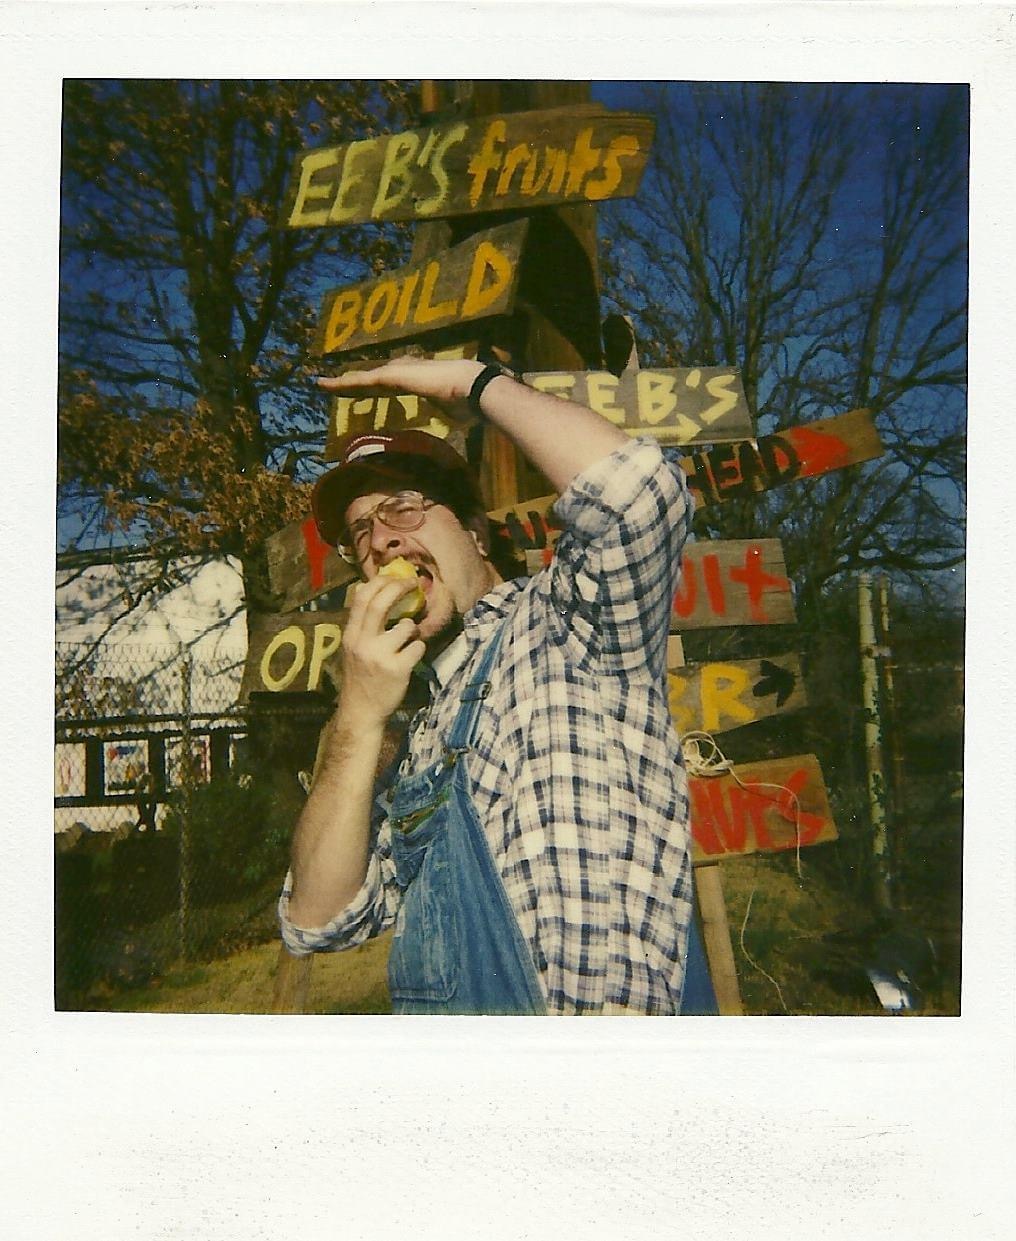 A photograph of an individual in a plaid shirt and denim overalls eating an apple standing in front of a set of signs — the top sign reads 